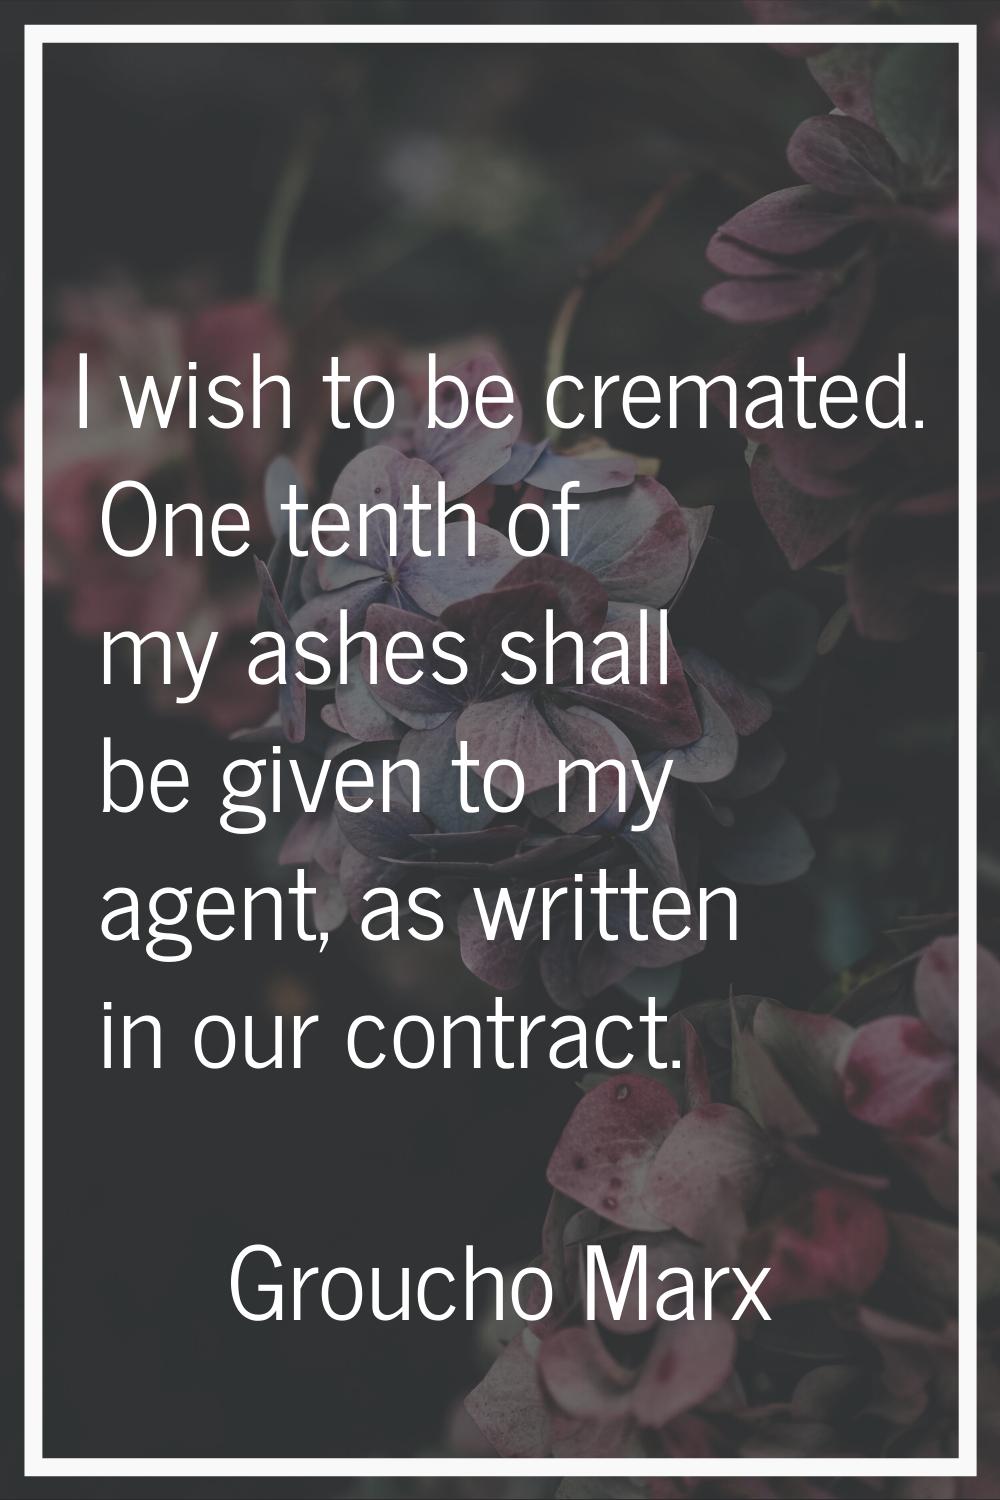 I wish to be cremated. One tenth of my ashes shall be given to my agent, as written in our contract